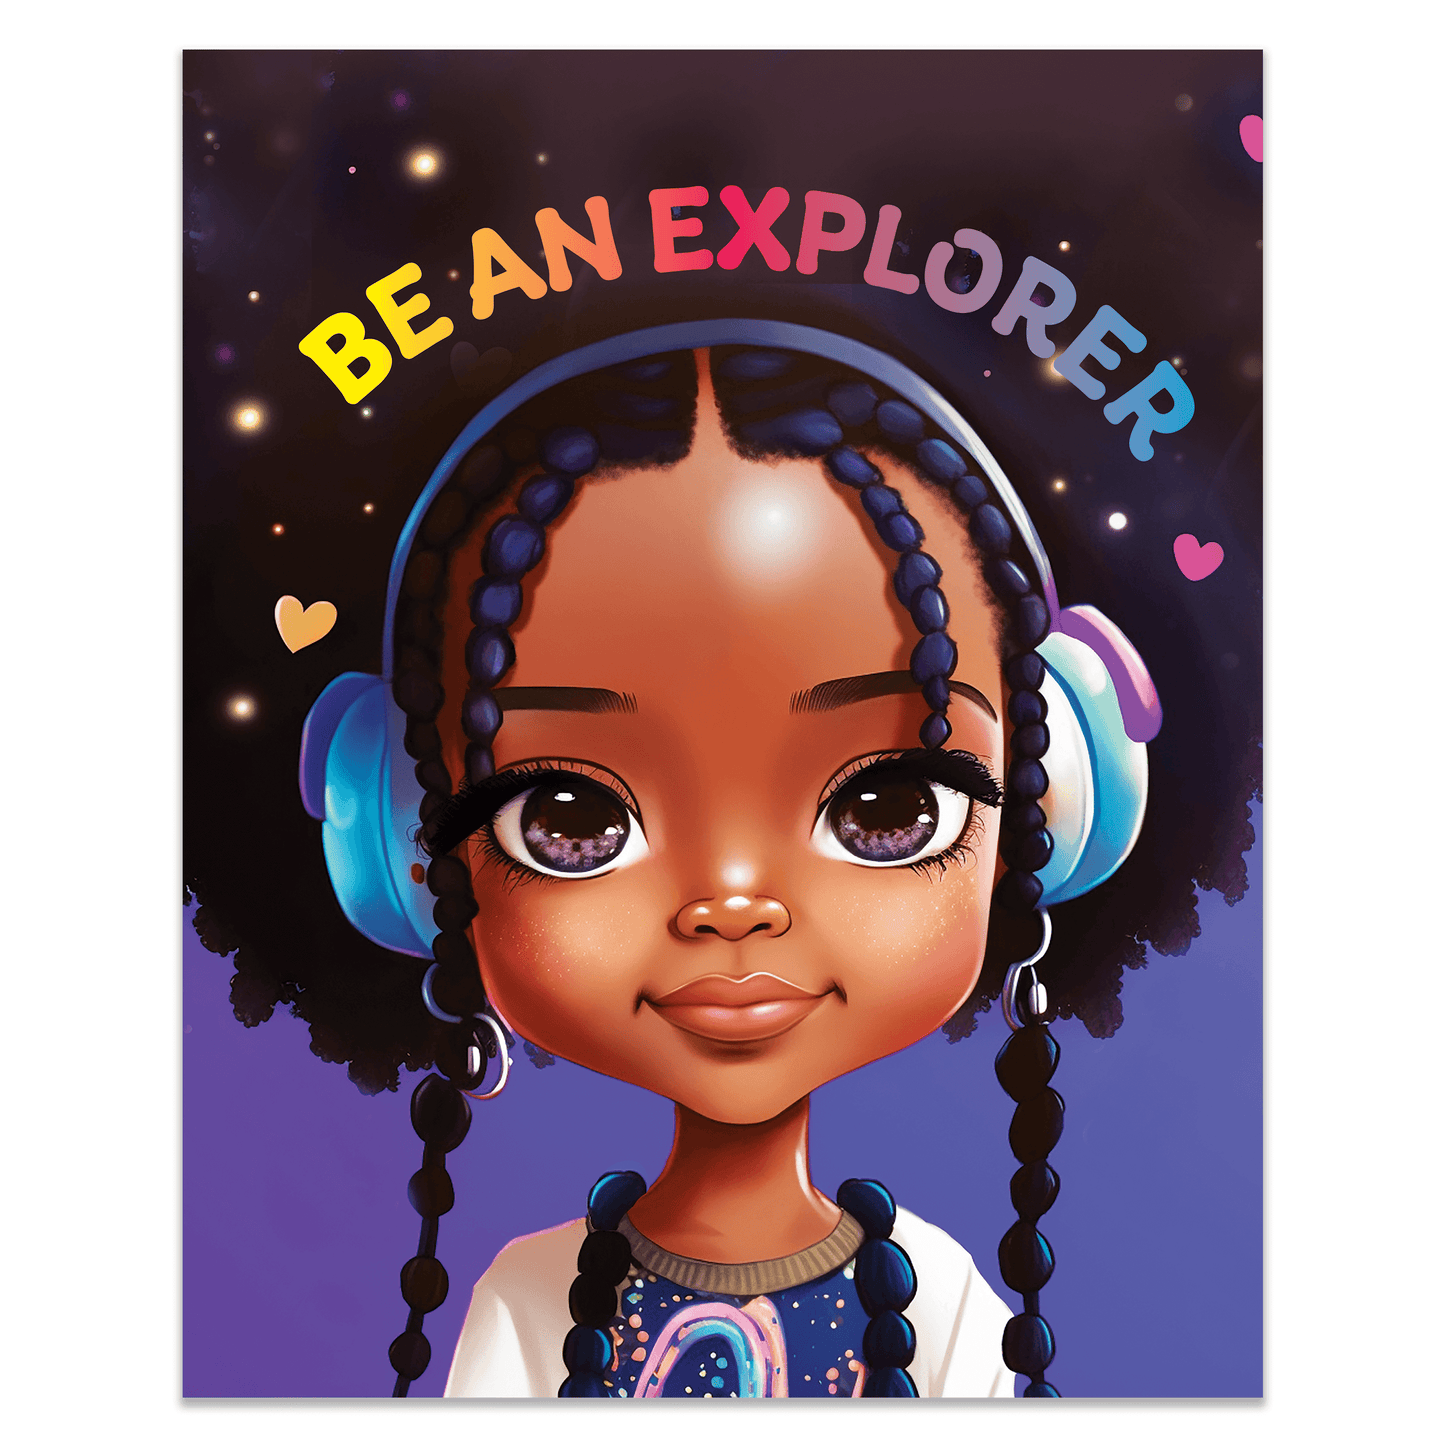 Cute African American Girl Art Print with Positive Affirmation - 8 x 10 inches